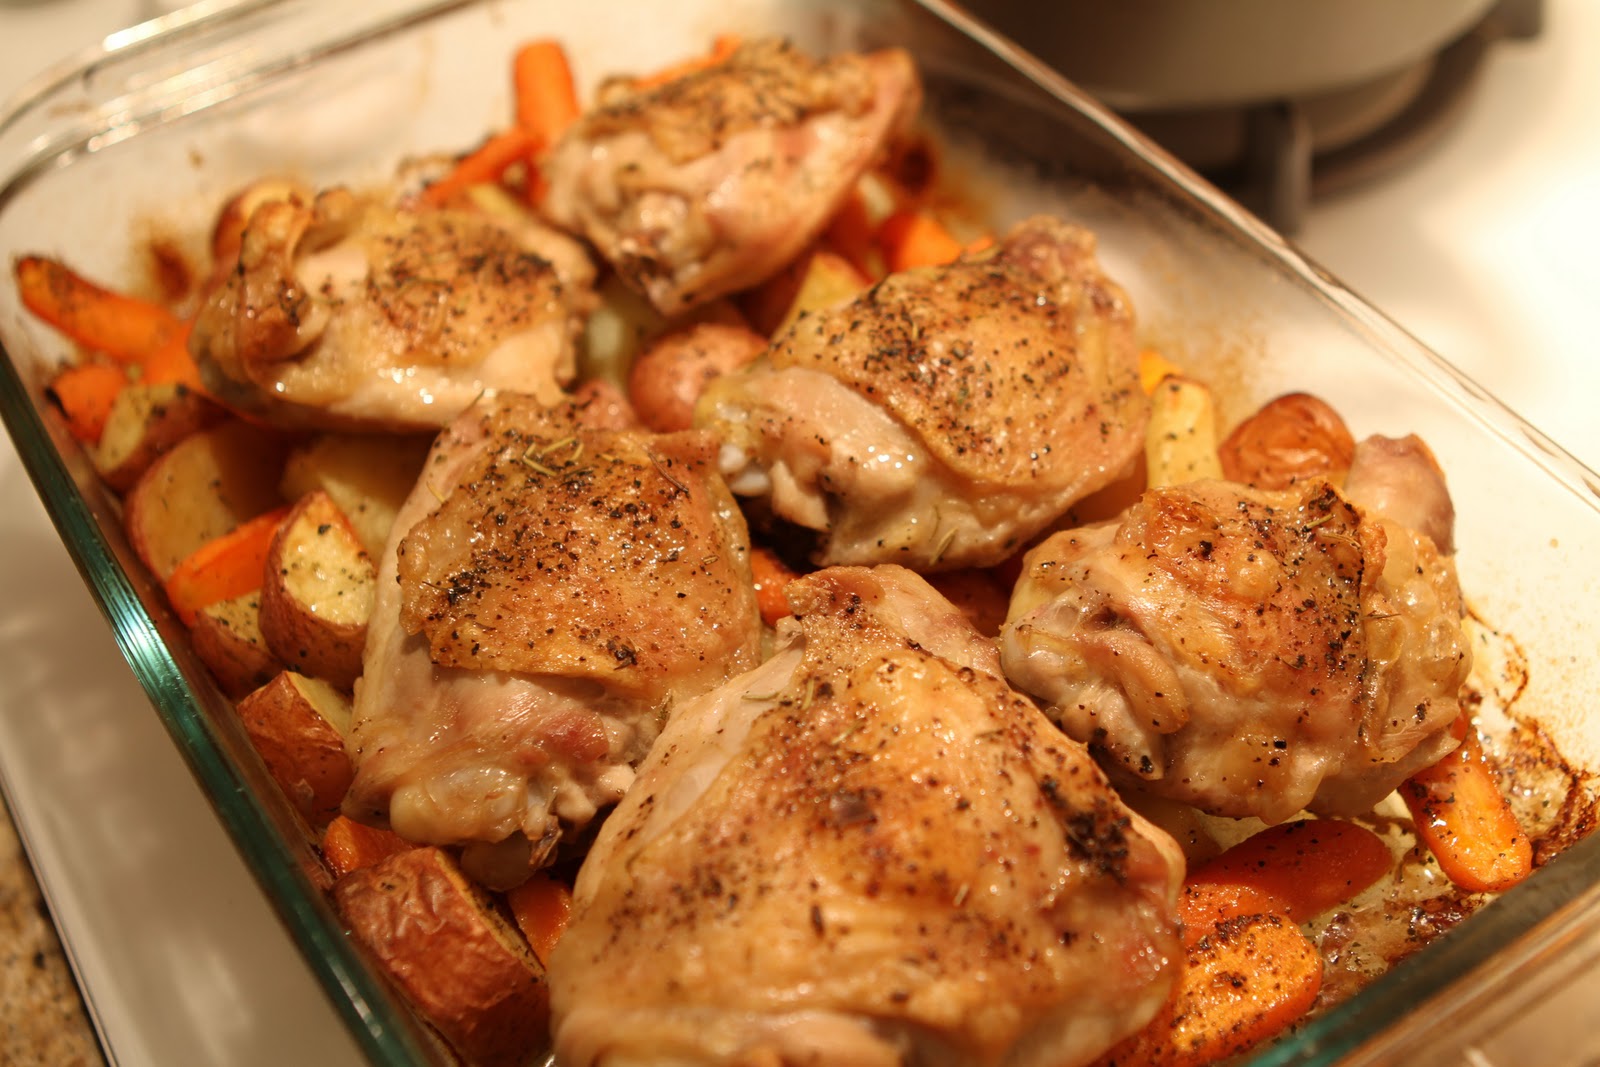 rosa's recipe box: oven-roasted chicken thighs with carrots and yukon ...